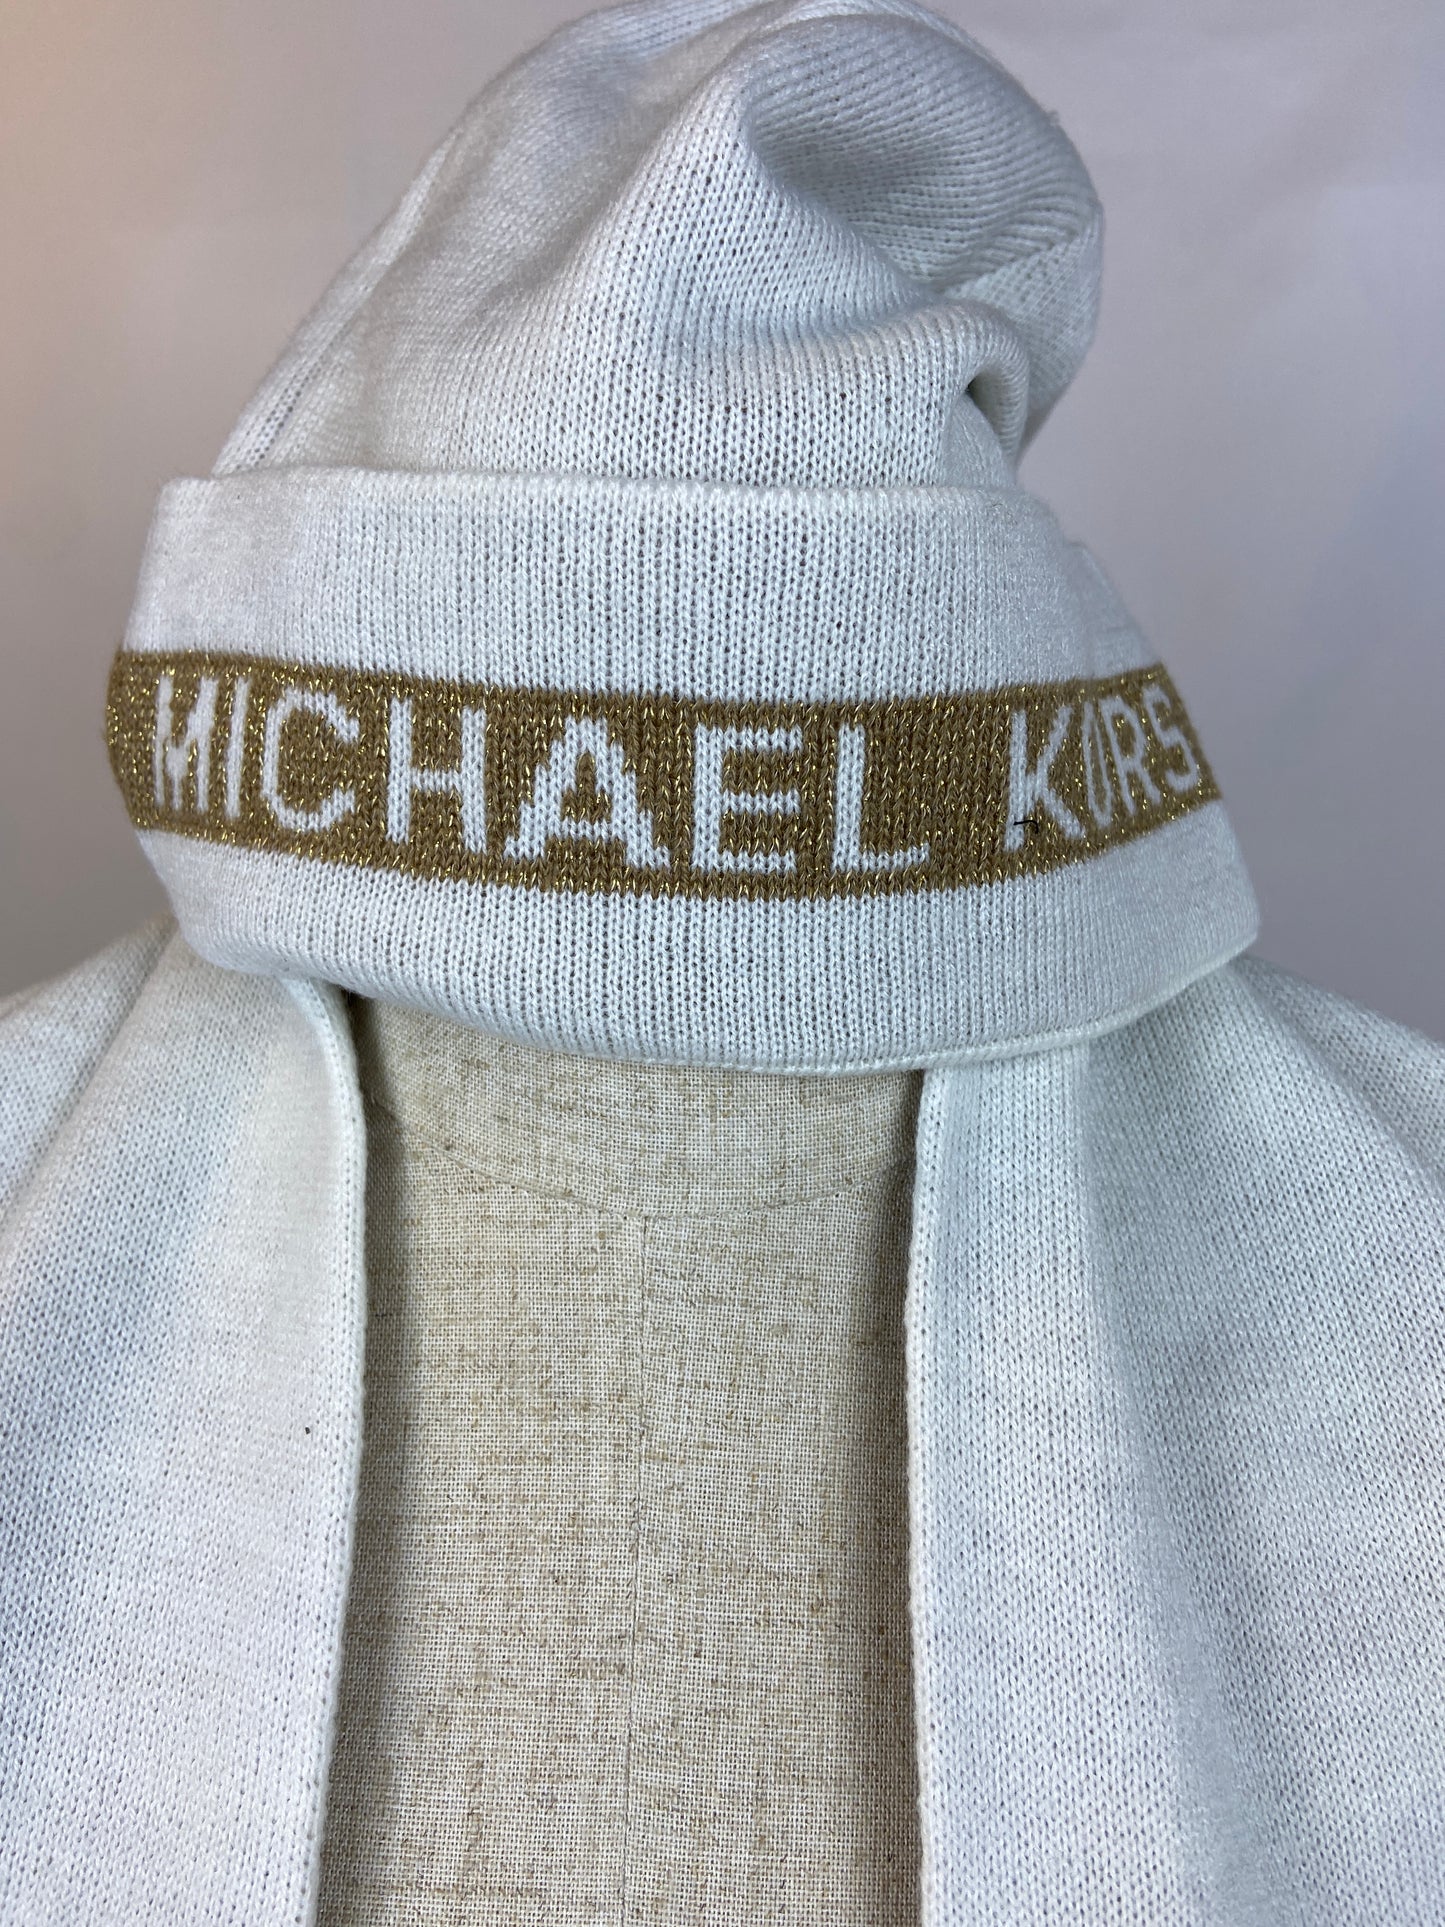 Michael Kors Hat & Scarf Set, Creme with Gold Accents NWT